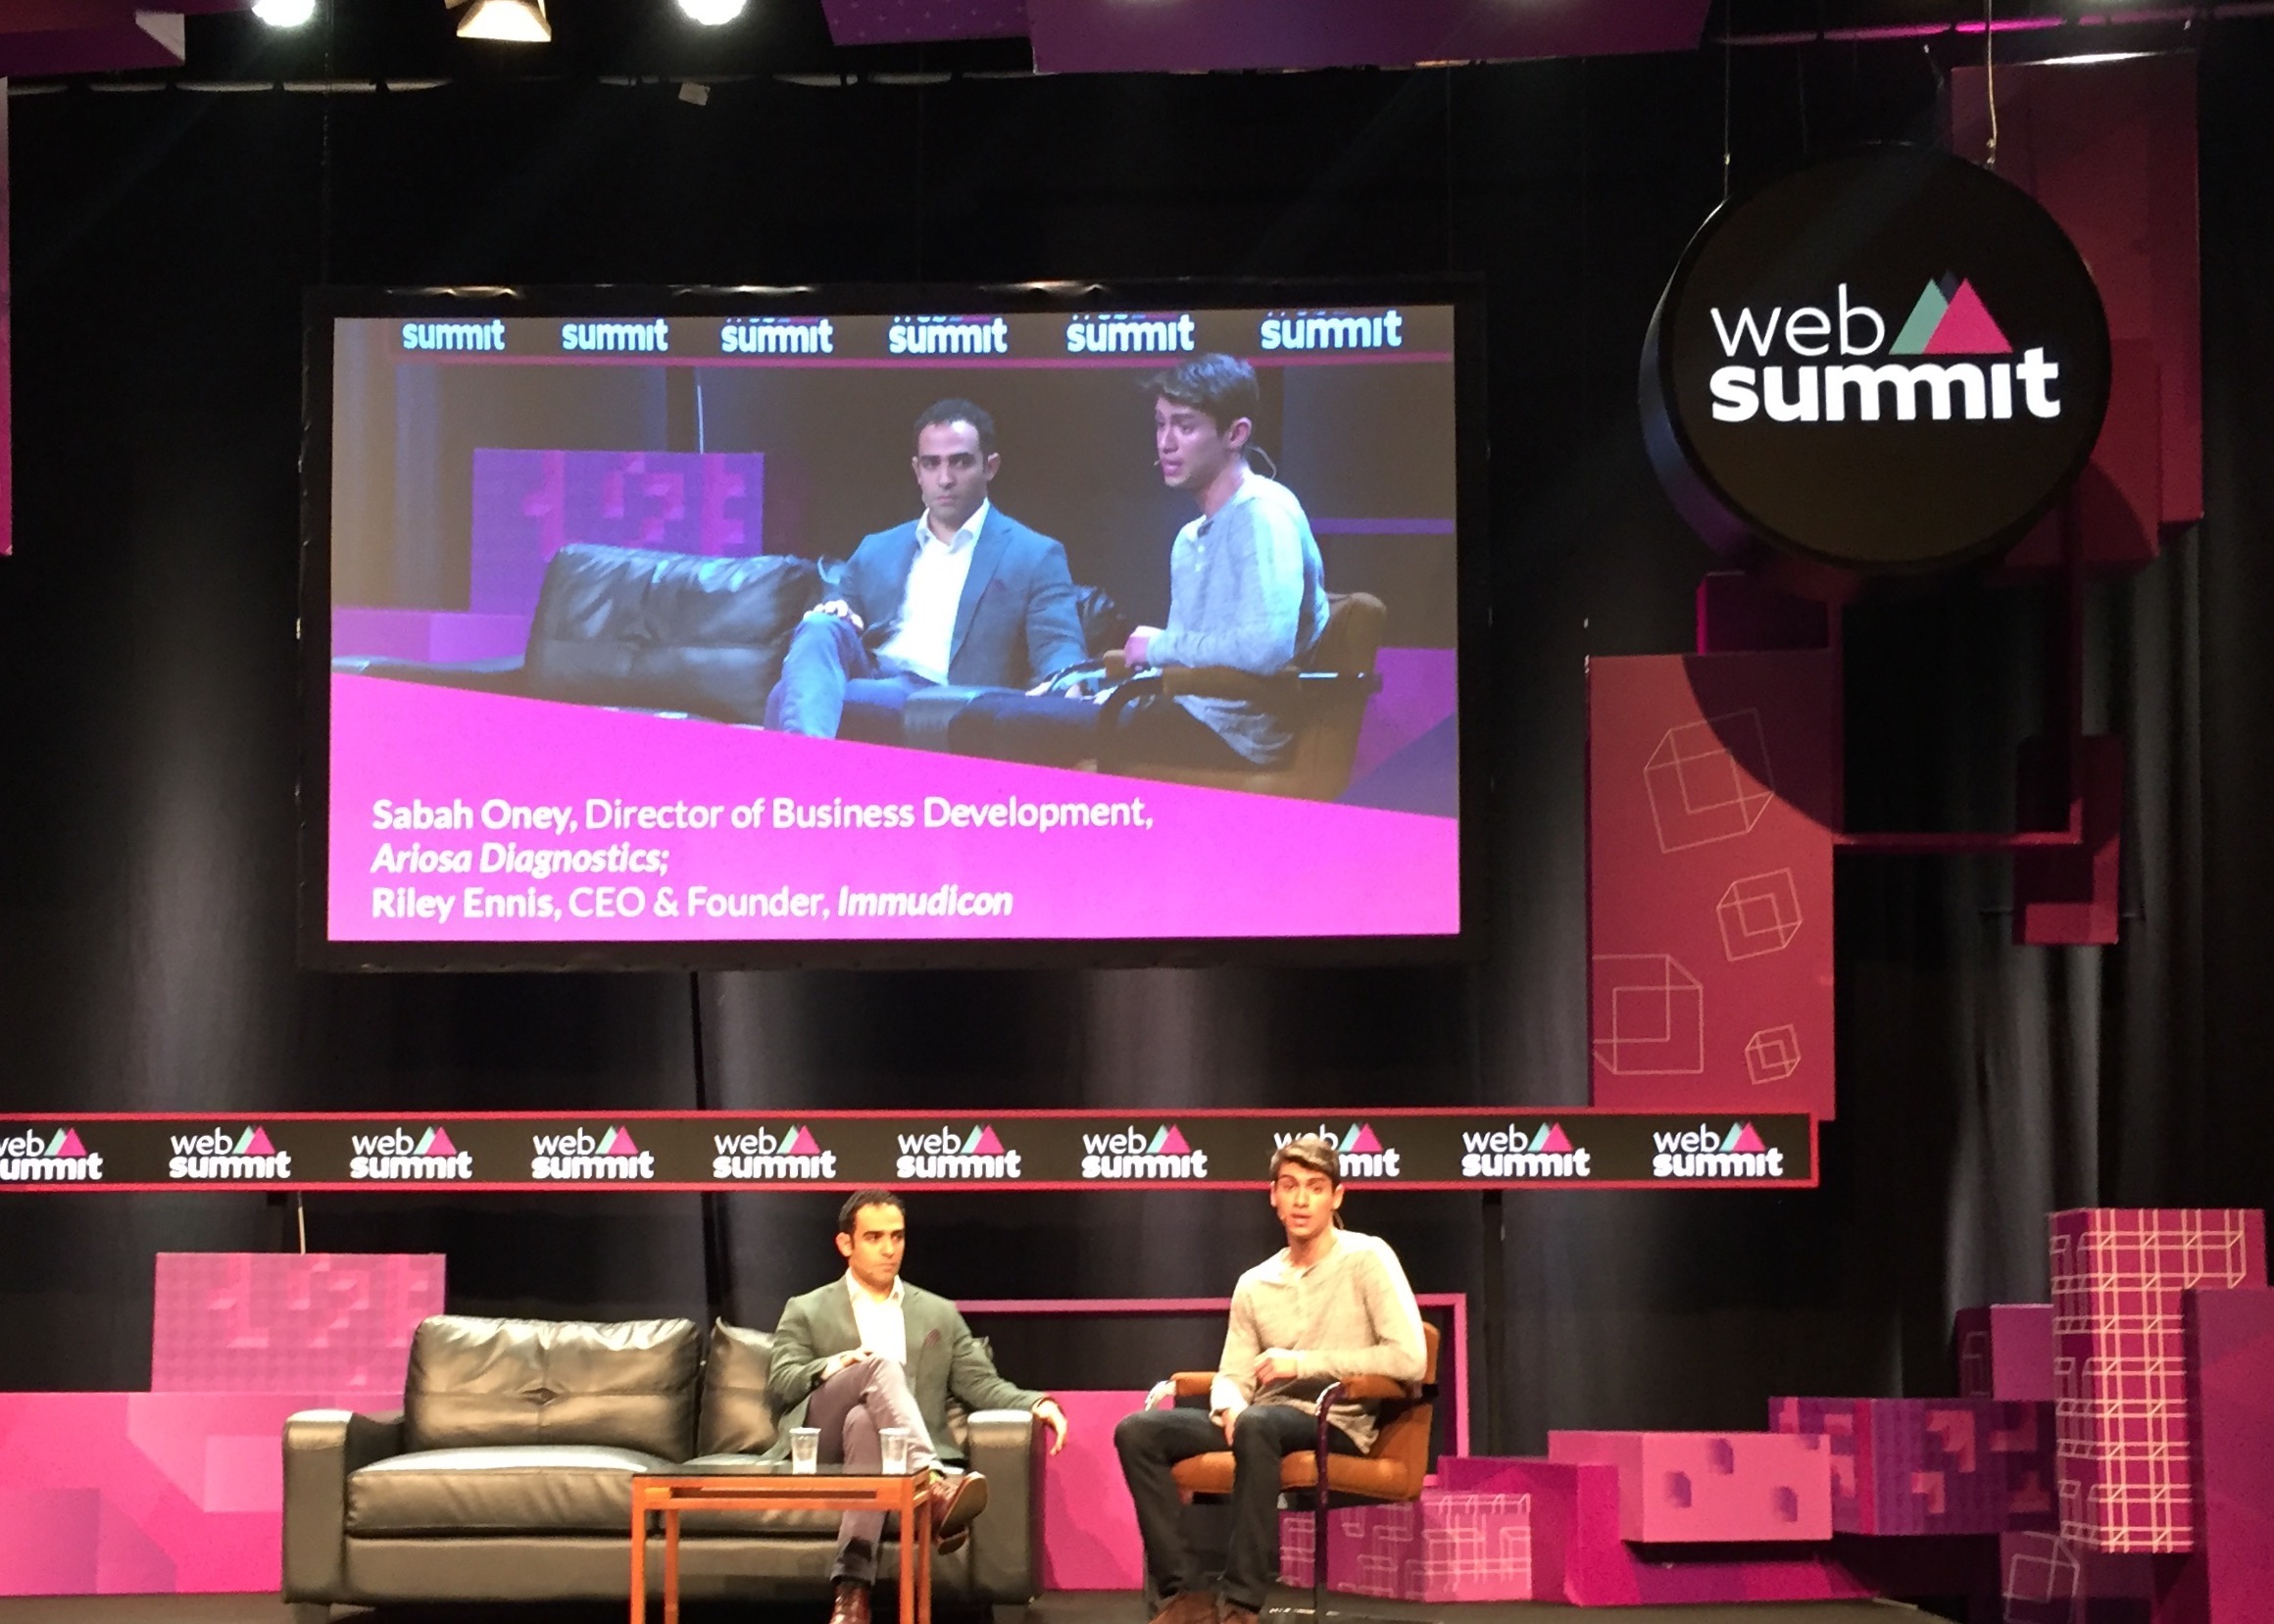 Riley Ennis and Sabah Oney HealthTech Panel - Web Summit 2015